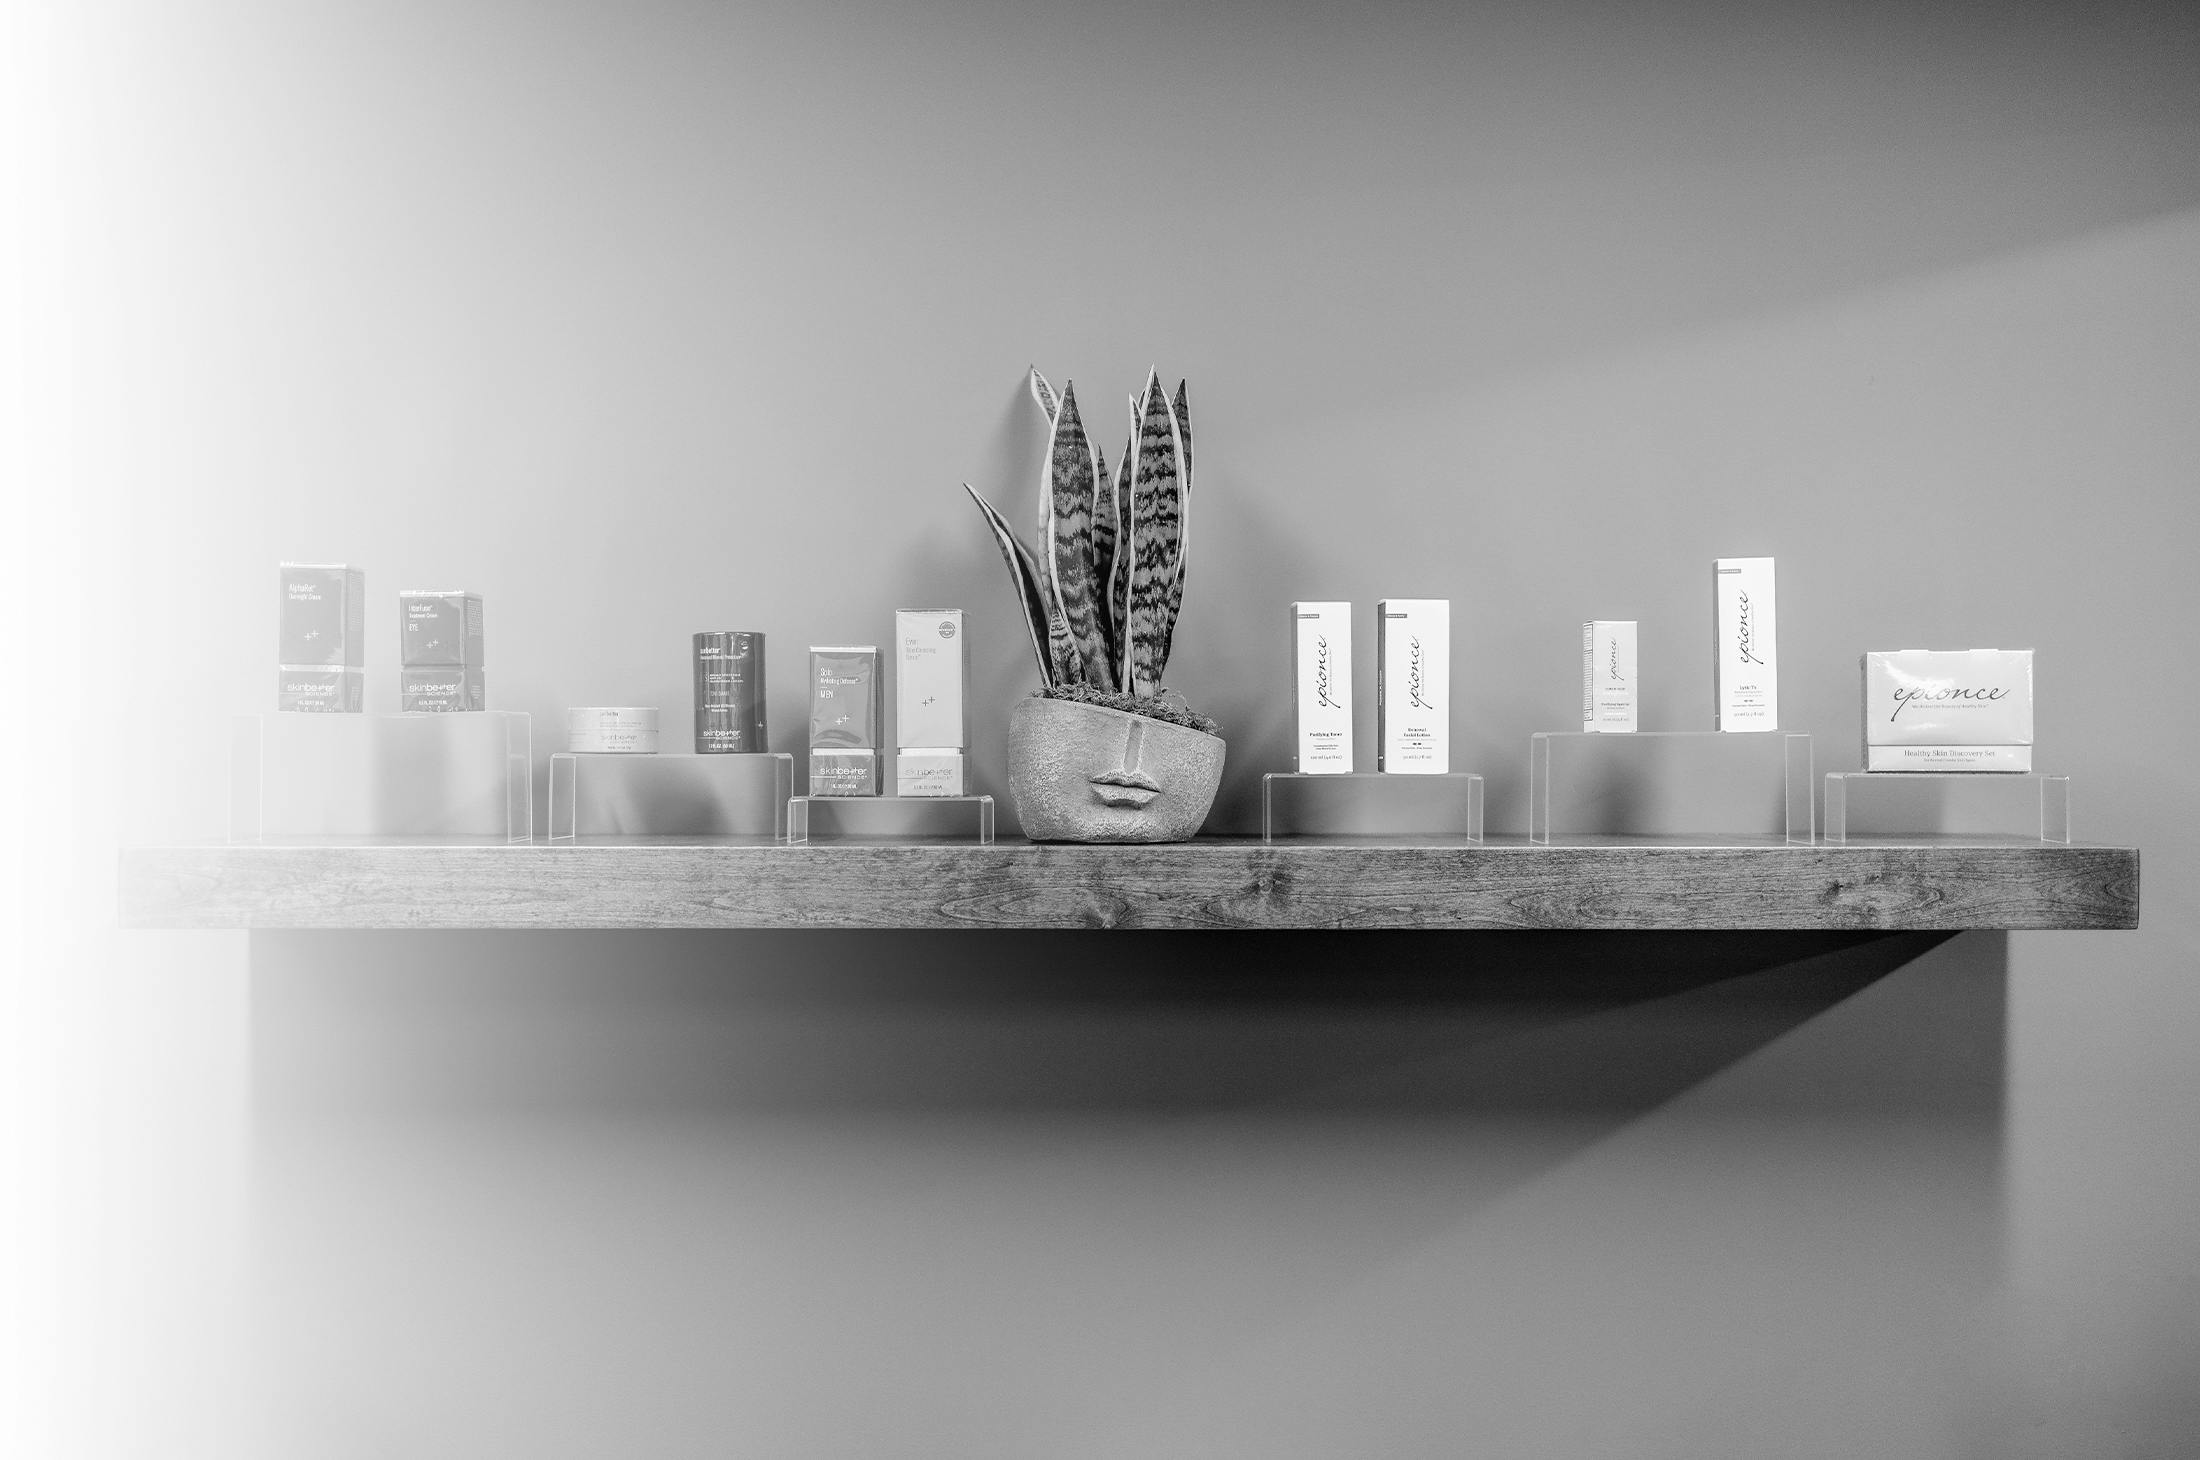 Shelf with skin care products